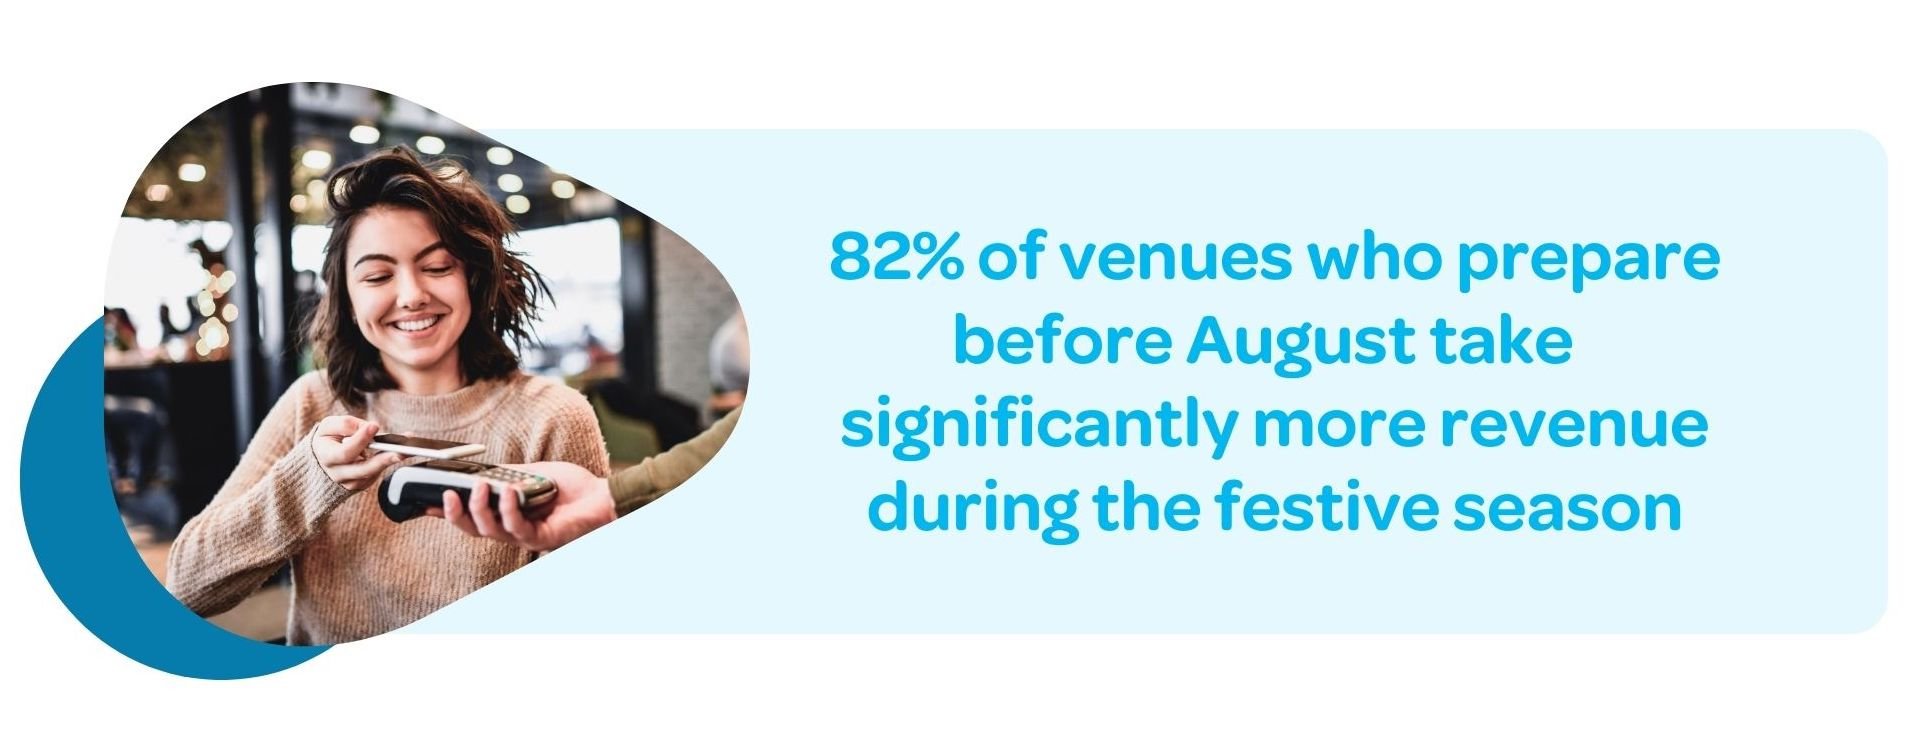 82% of restaurants that prepare before August take significantly more revenue during the festive season